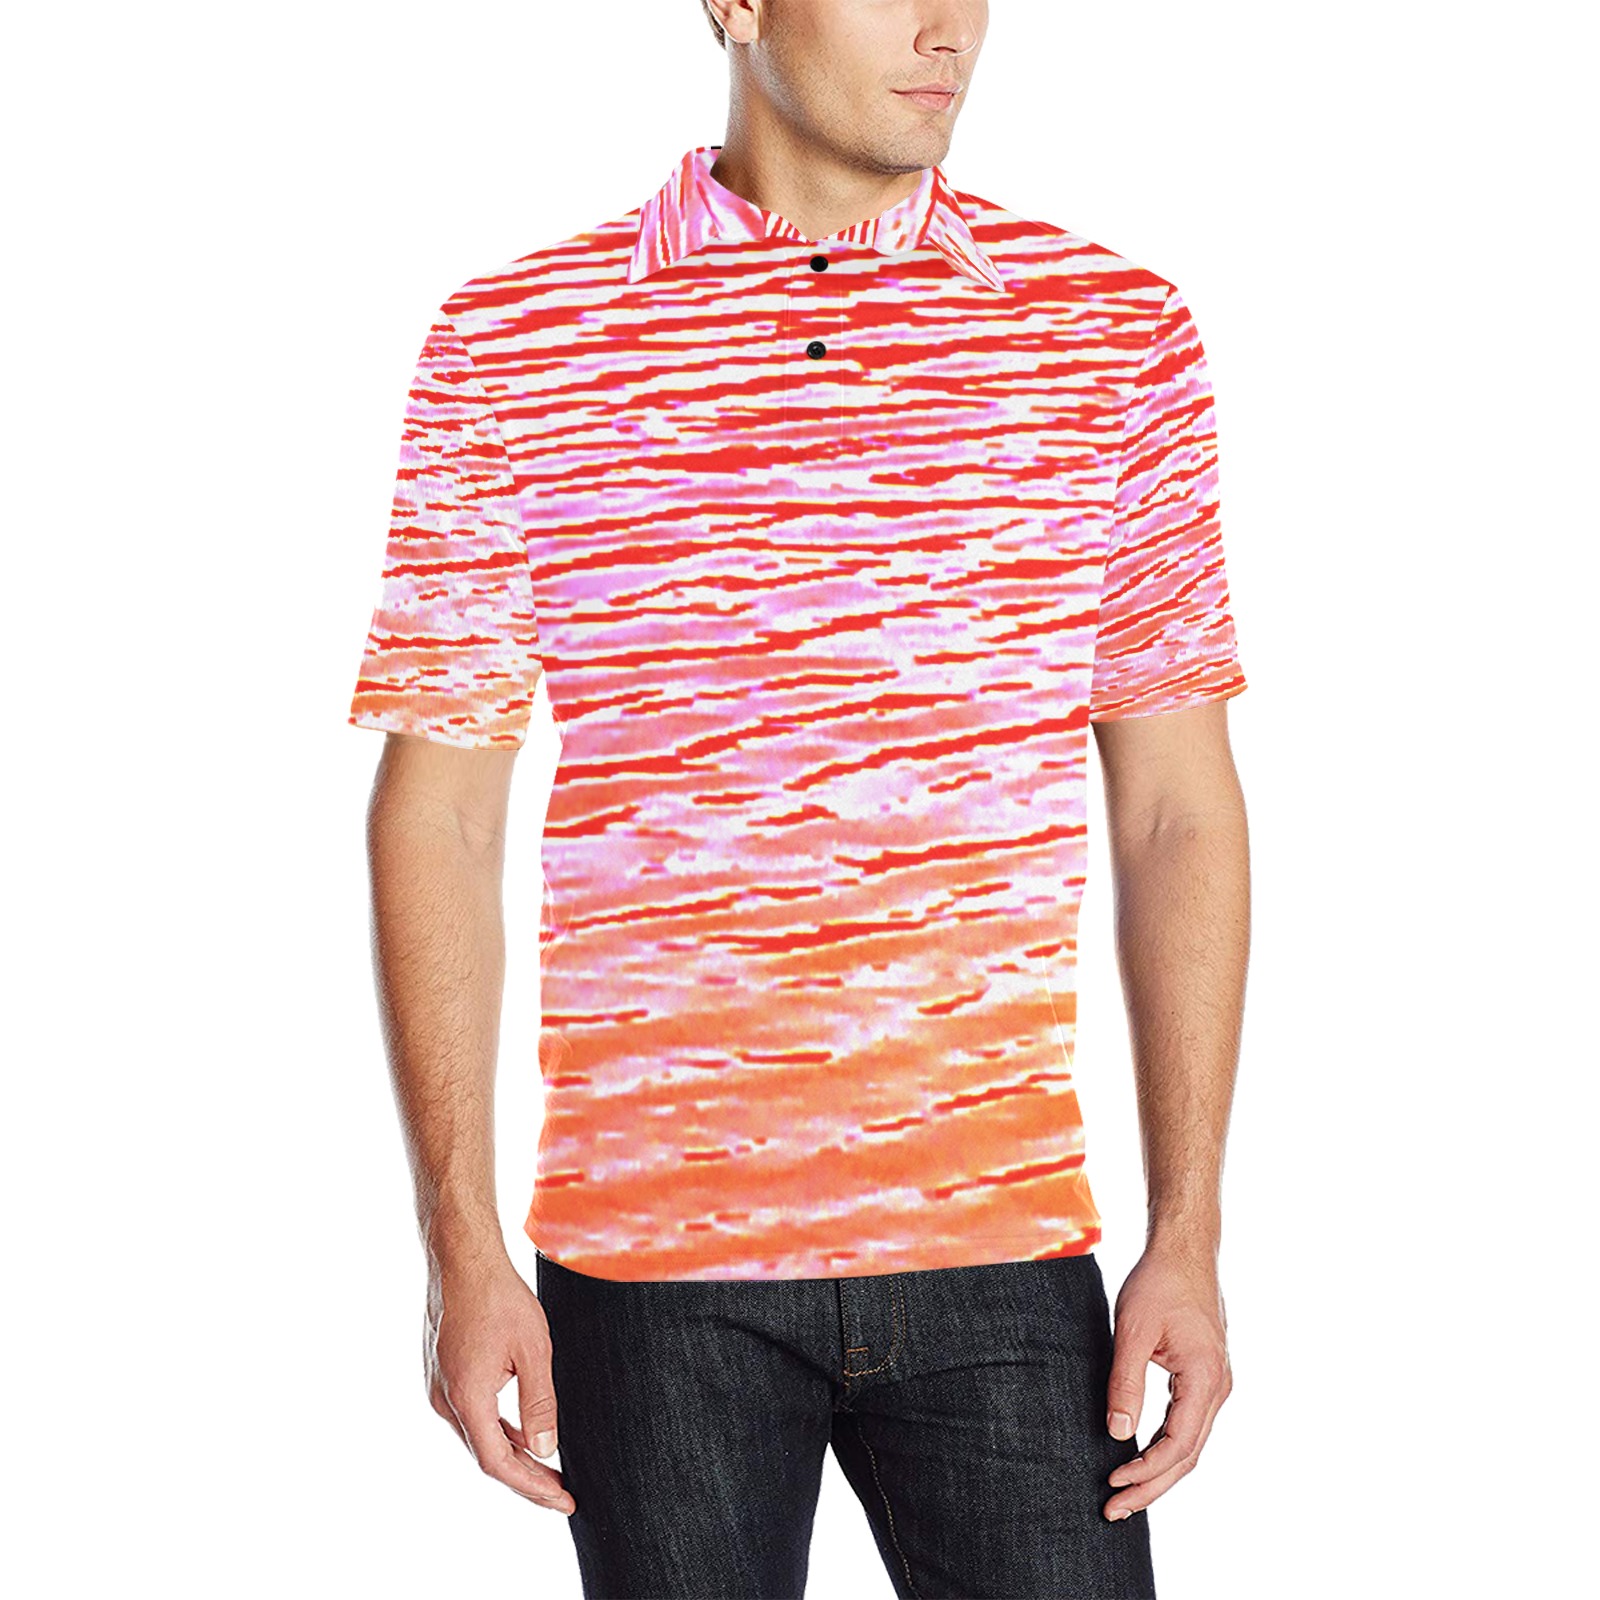 Orange and red water Men's All Over Print Polo Shirt (Model T55)